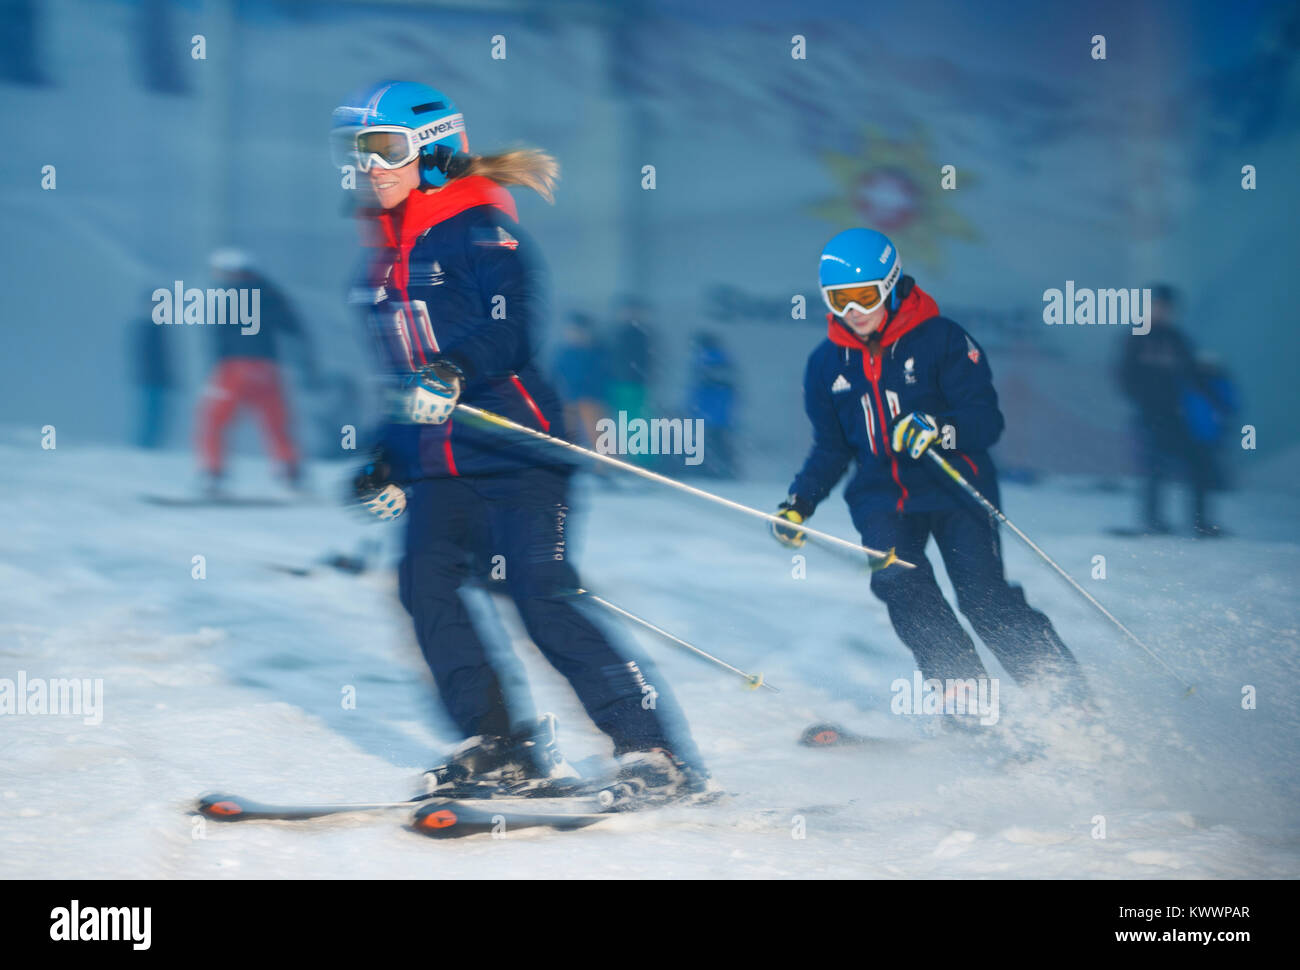 ParalympicsGB skiers Jennifer Kehoe (right) and Menna Fitzpatrick during the ParalympicsGB 2018 Winter Olympics Alpine Skiing and Snowboard team announcement, at The Snowcentre, Hemel Hempstead. Stock Photo